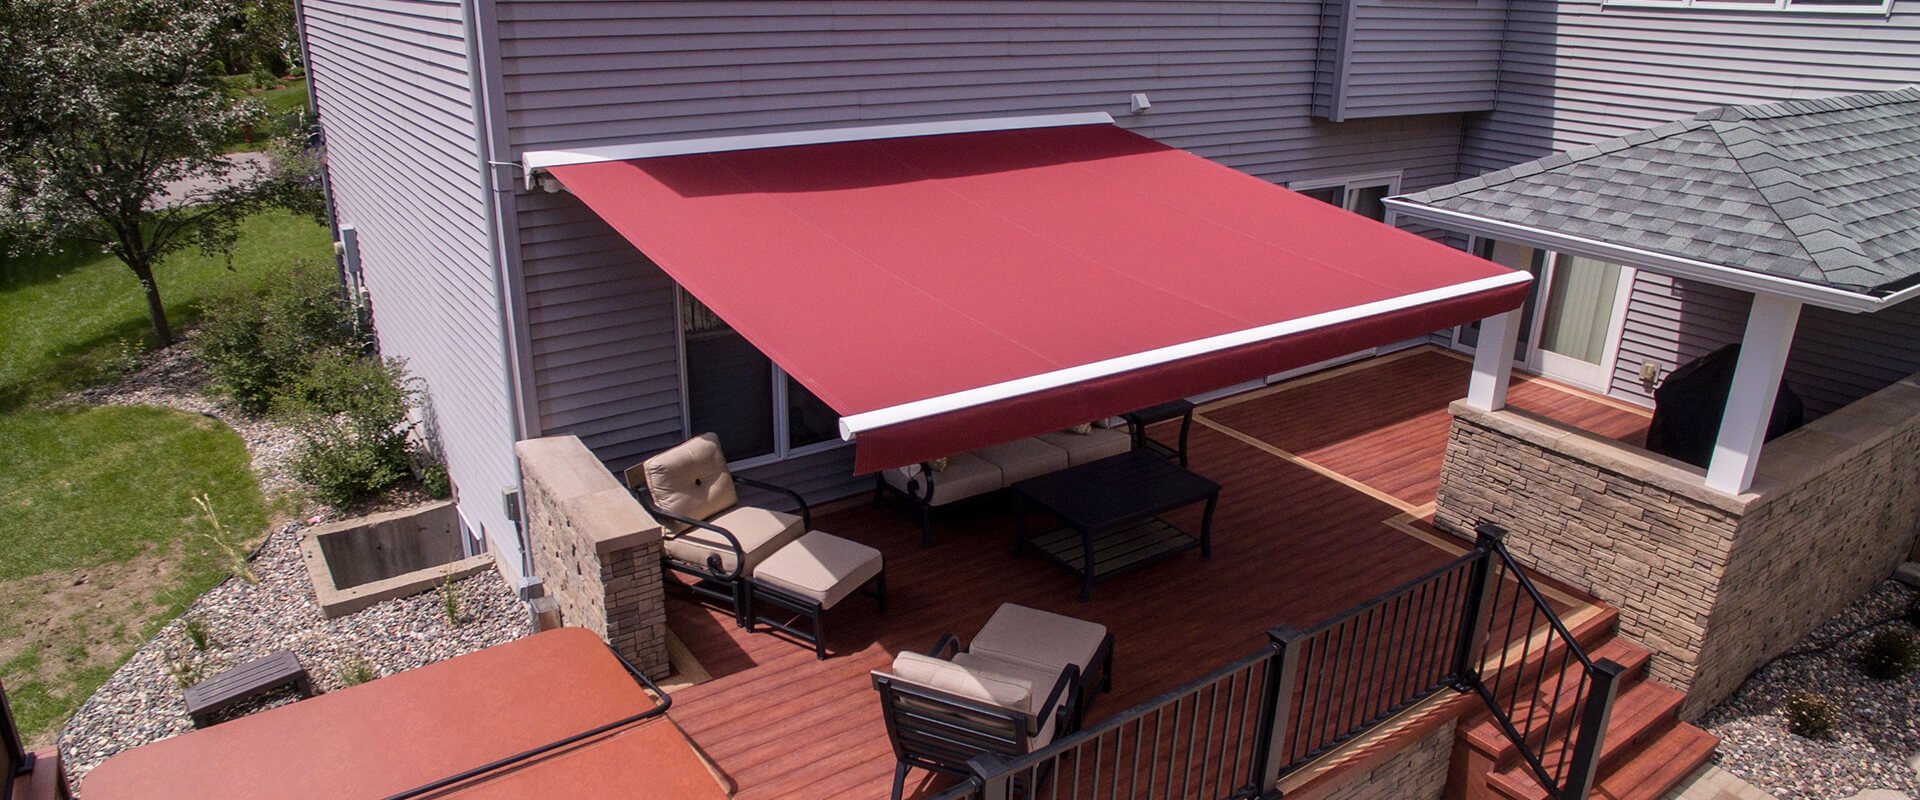 Improve Curb Appeal with Colorful Awnings